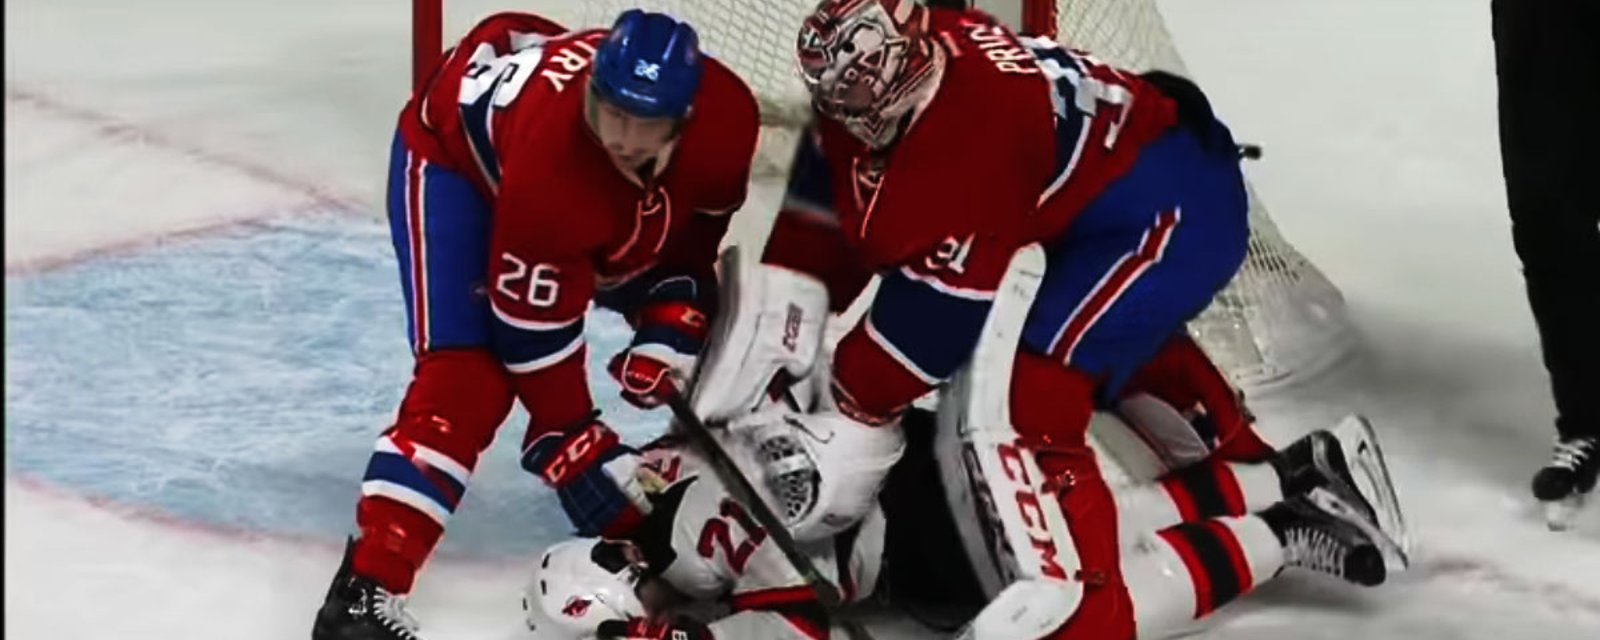 Surprising reaction from Cory Schneider following Carey Price meltdown!